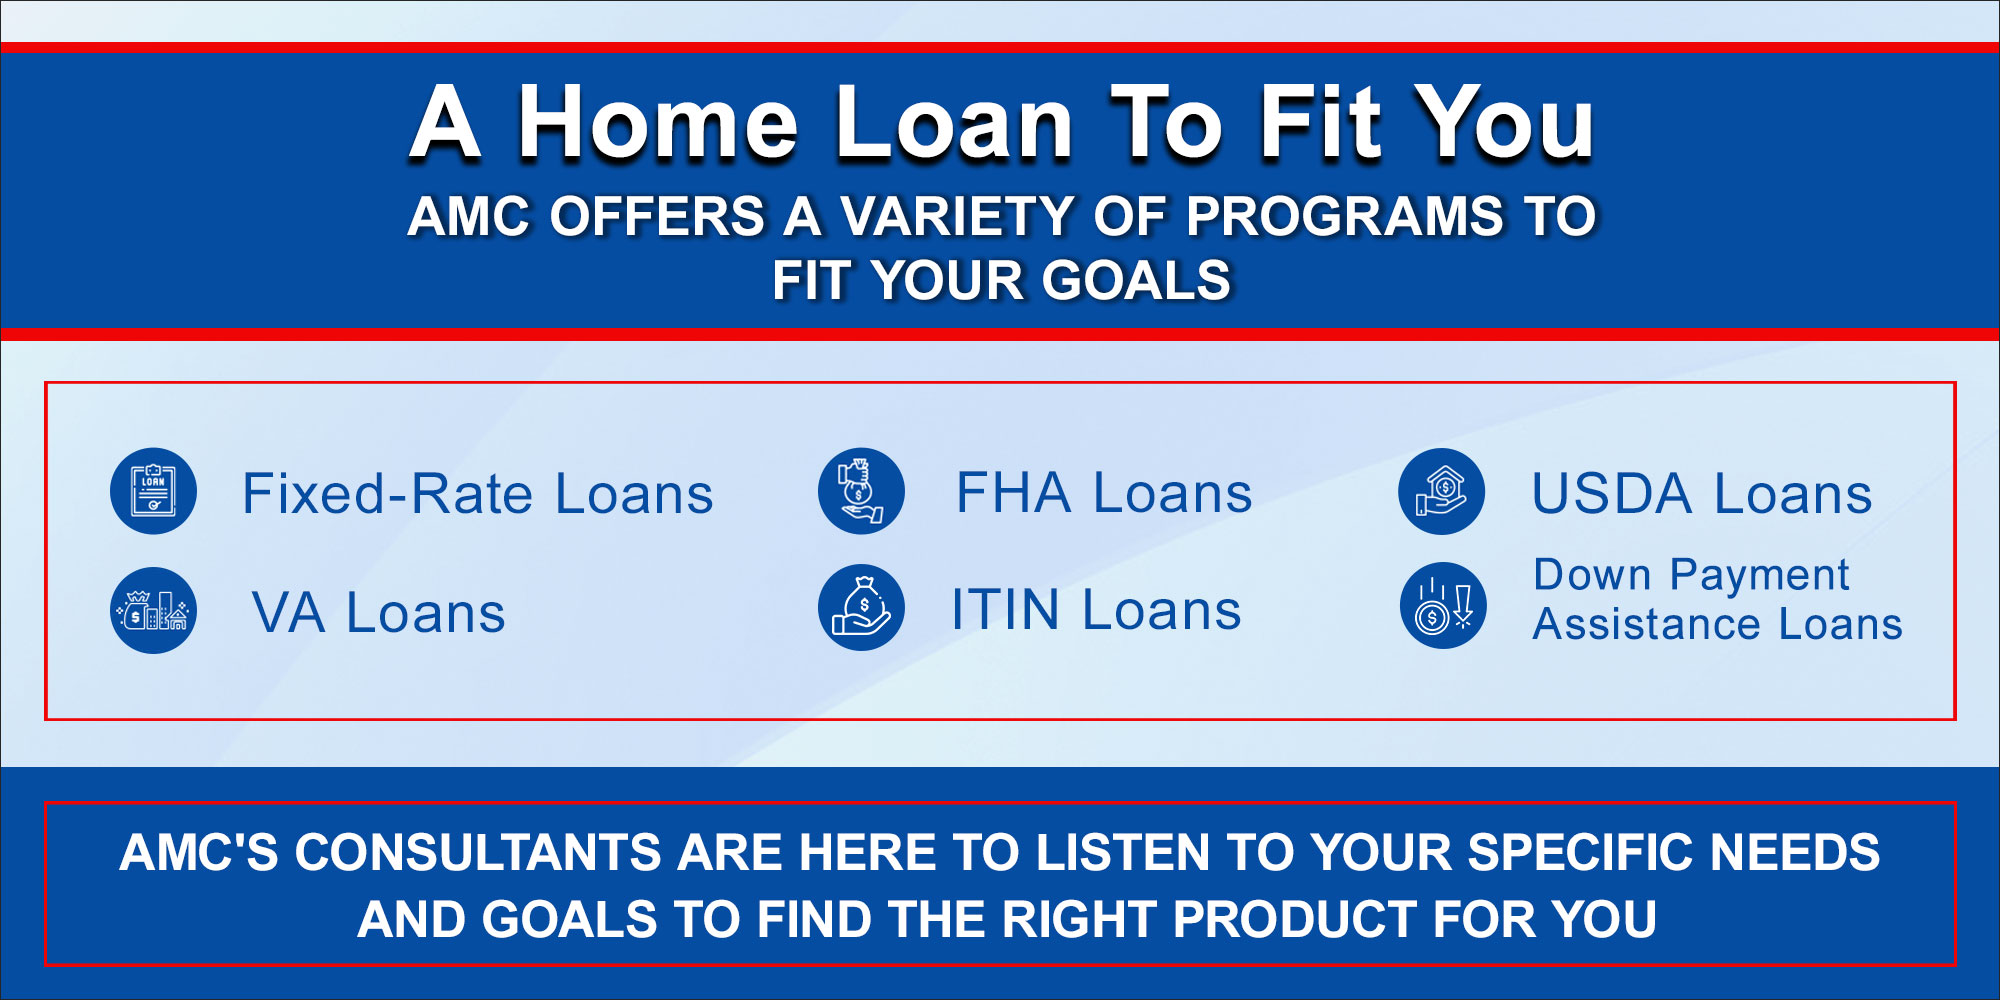 A home loan to fit you